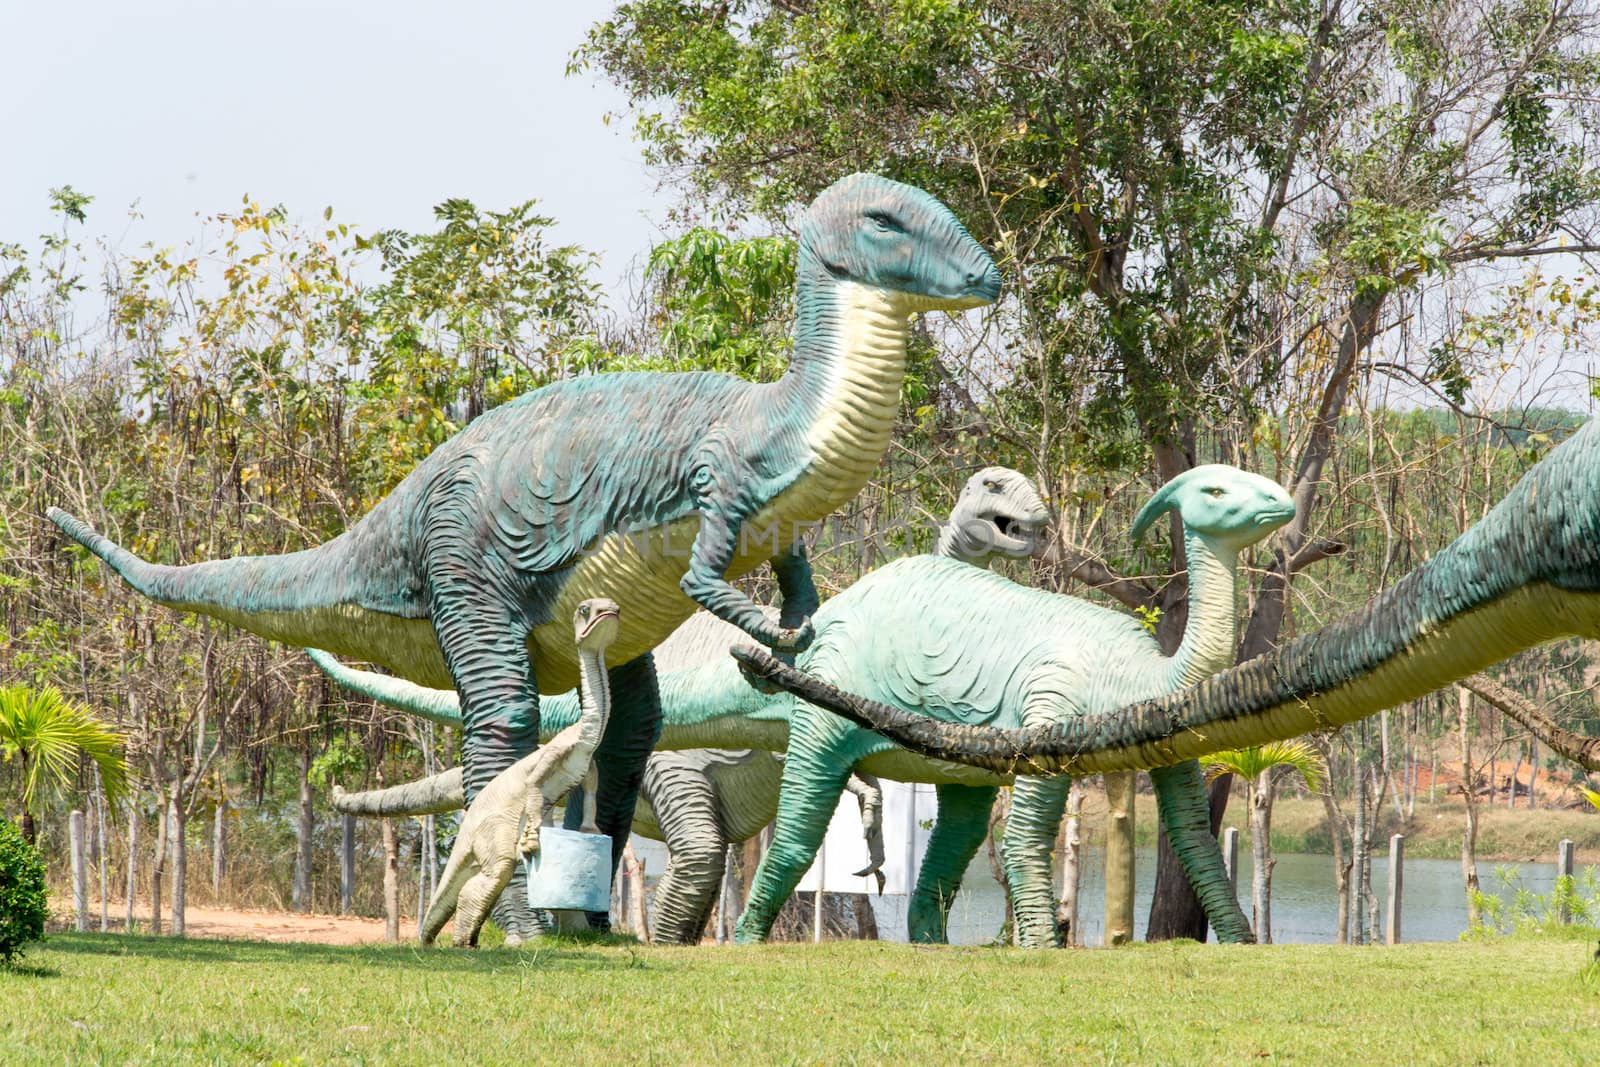 public parks of statues and dinosaur by myibean